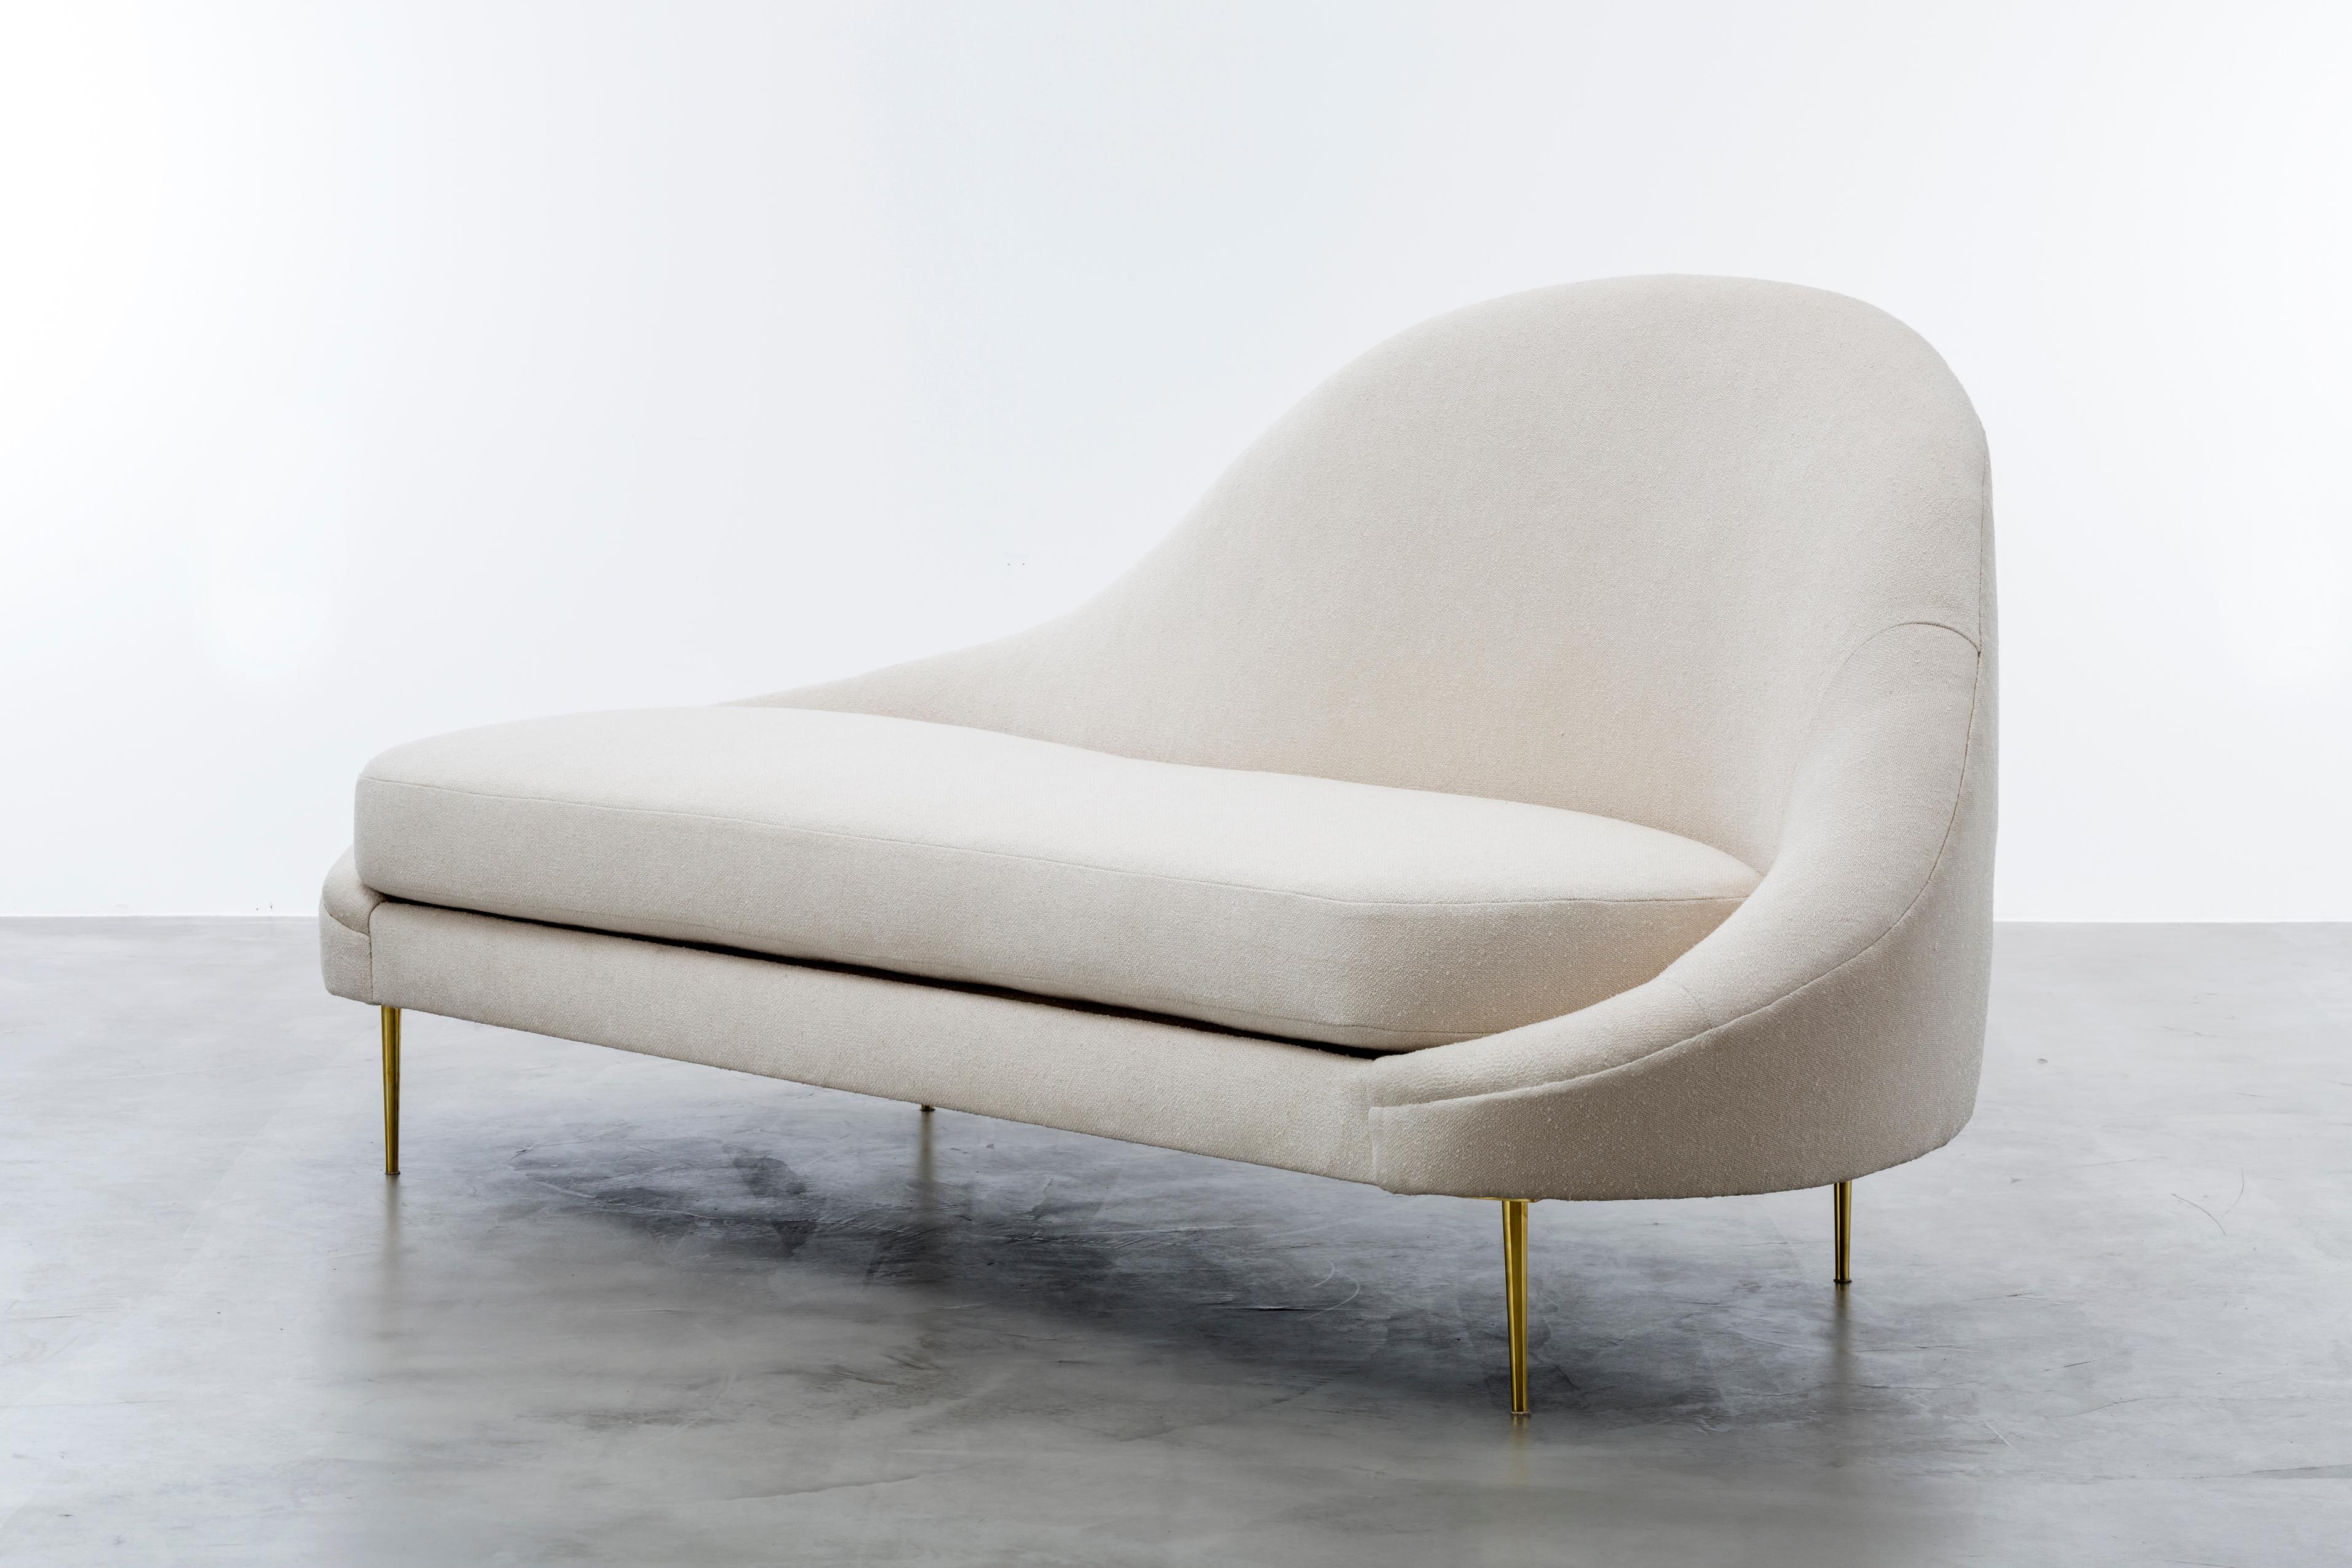 SANDRIINE CHAISE - Modern Asymmetrical Slope Chaise COM

The Sandrine Chaise is a stunning piece of furniture inspired by the curved lines of Gaudi architecture. Its asymmetrical slope design, combined with solid brass legs, creates a minimalistic